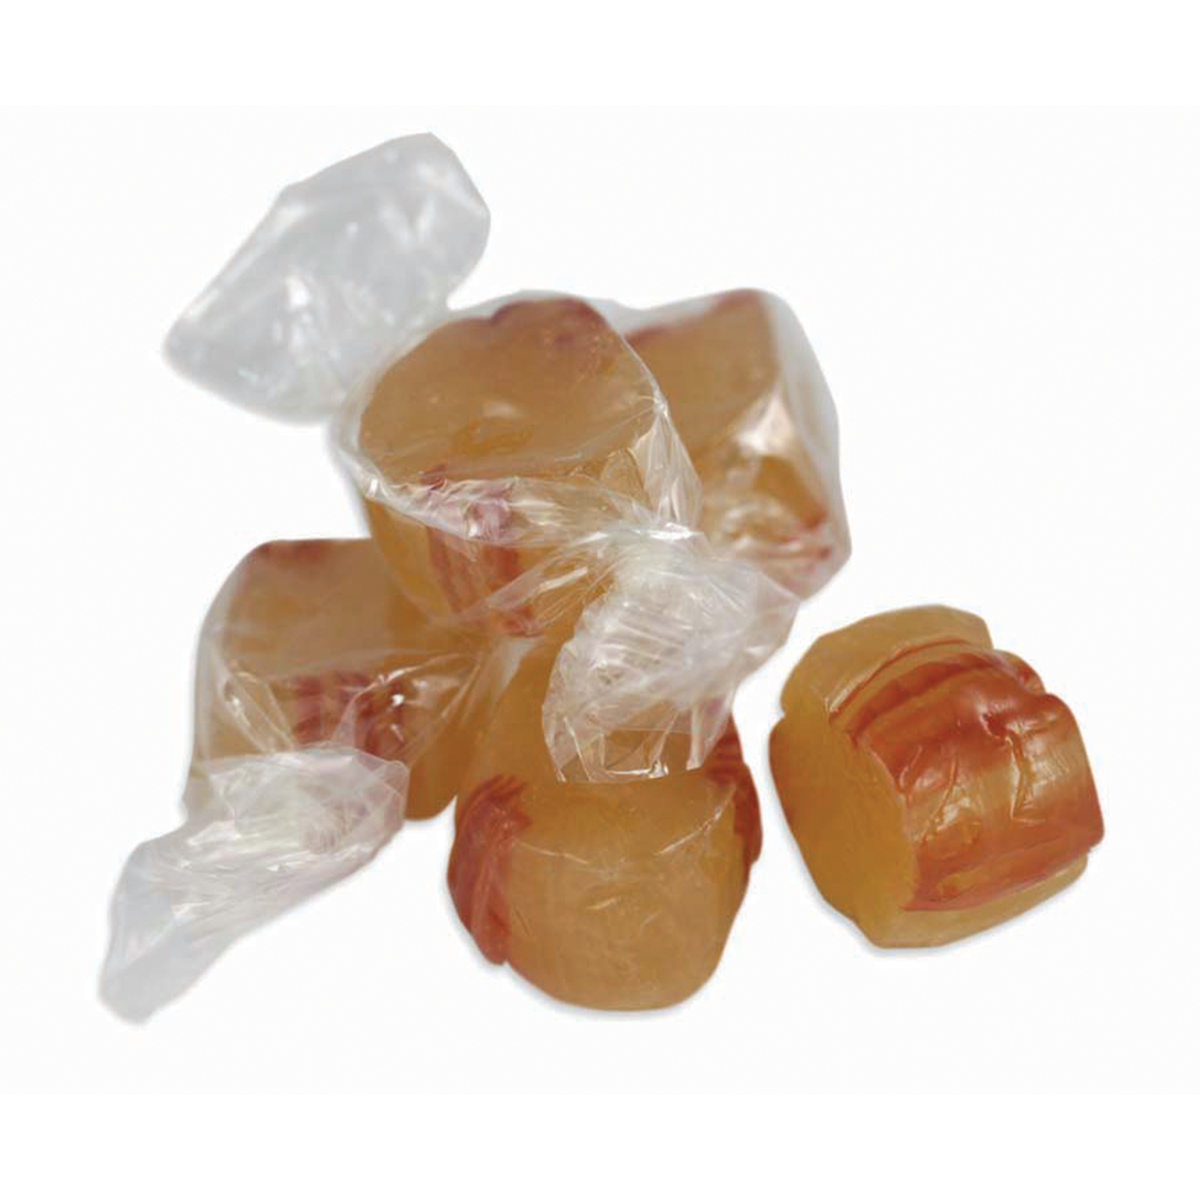 All City Candy Ginger Cuts Hard Candy 3 Lb Bulk Bag Bulk Wrapped Primrose Candy For Fresh 1037